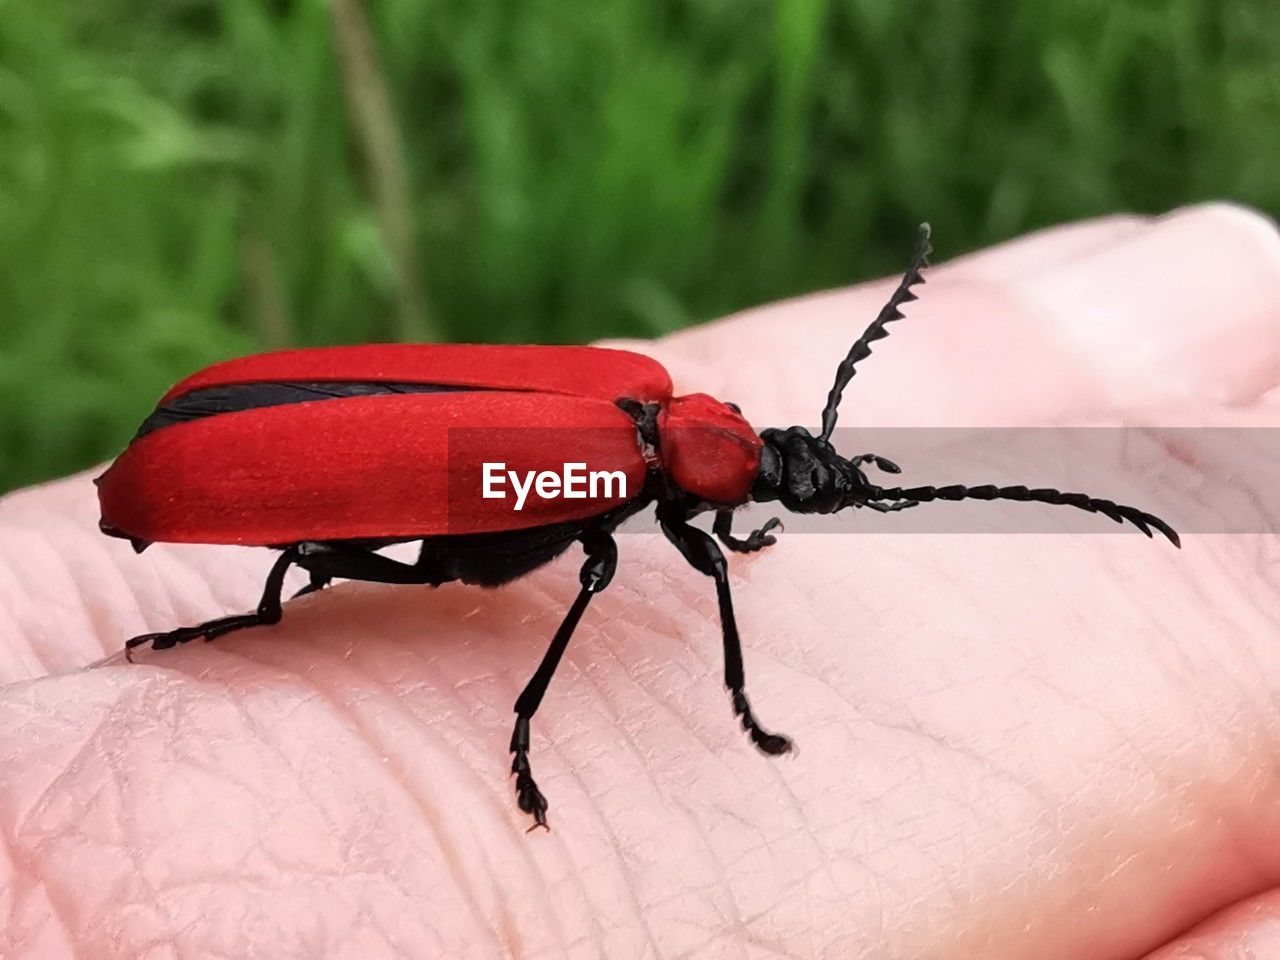 beetle, animal themes, animal, insect, hand, one animal, animal wildlife, one person, close-up, macro photography, wildlife, finger, focus on foreground, red, nature, holding, day, outdoors